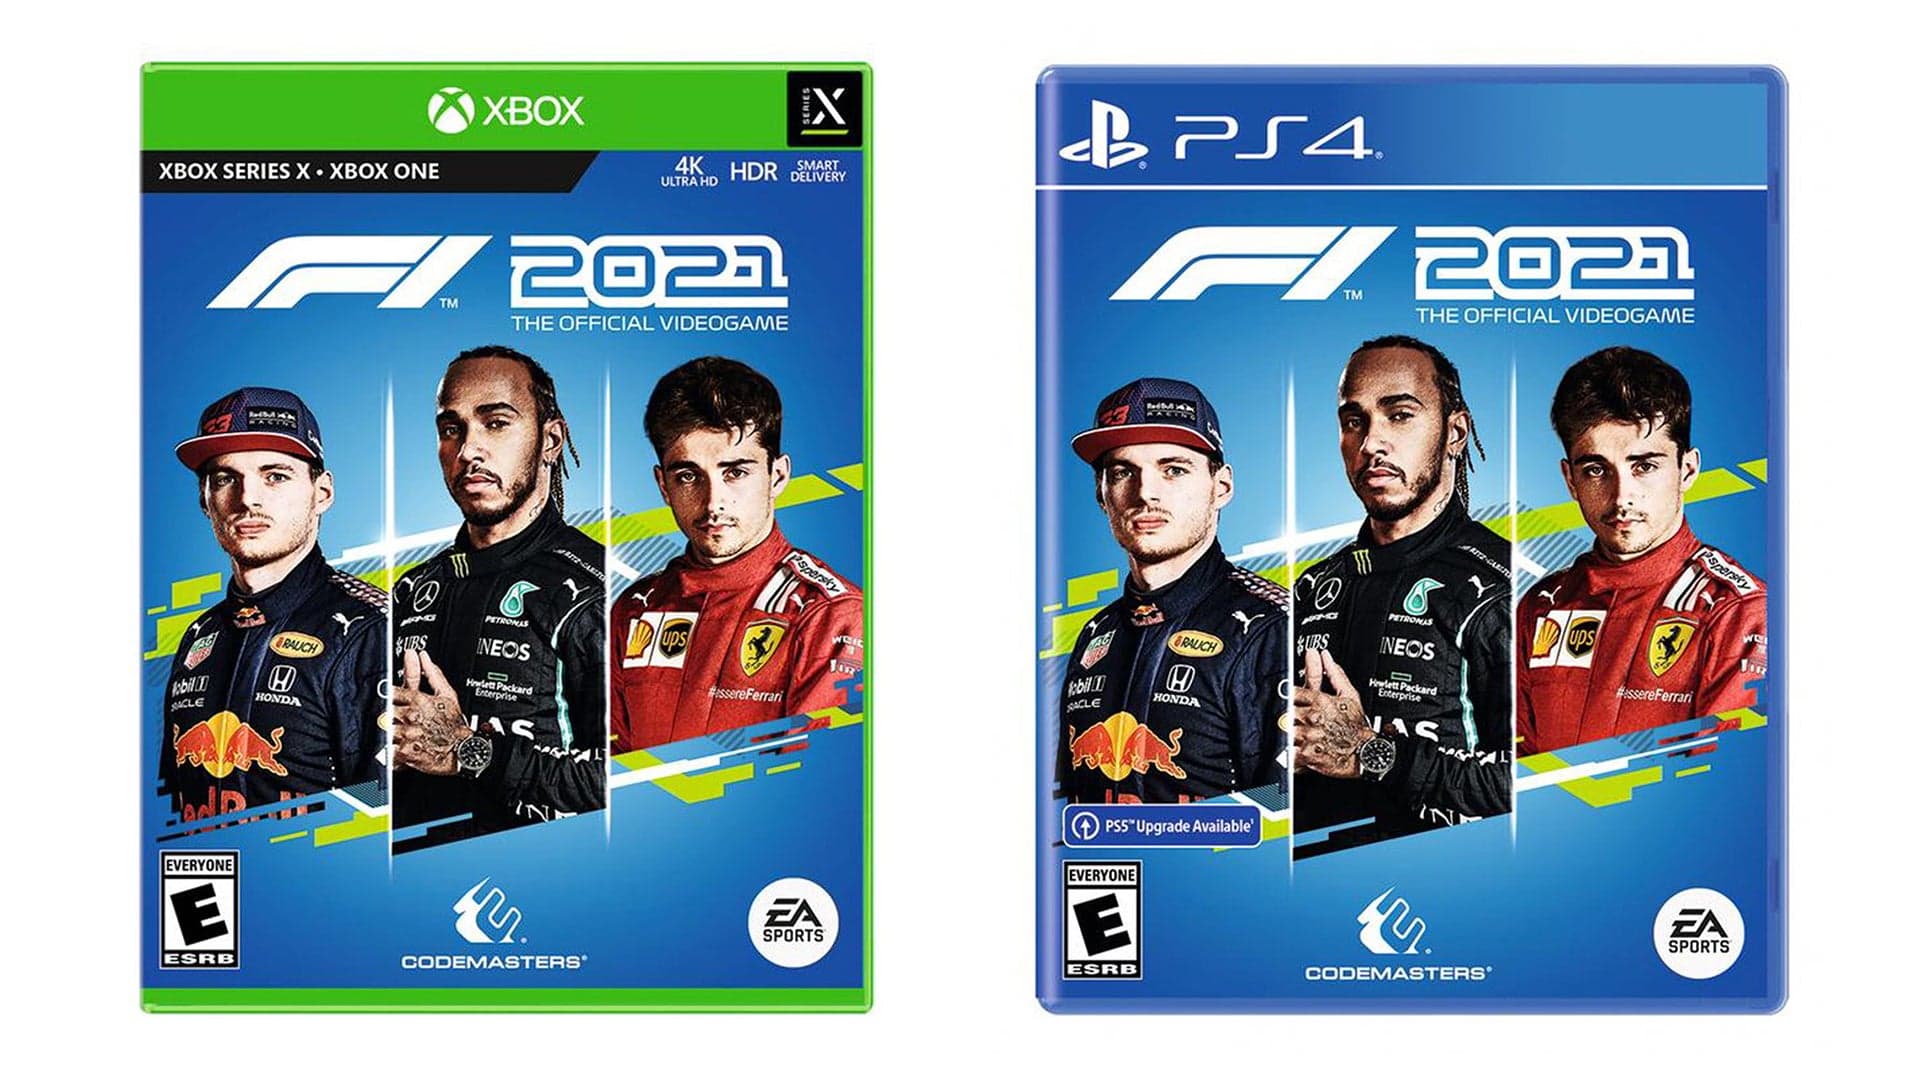 F1 2021 Is Here—And It’s On Sale at Walmart!